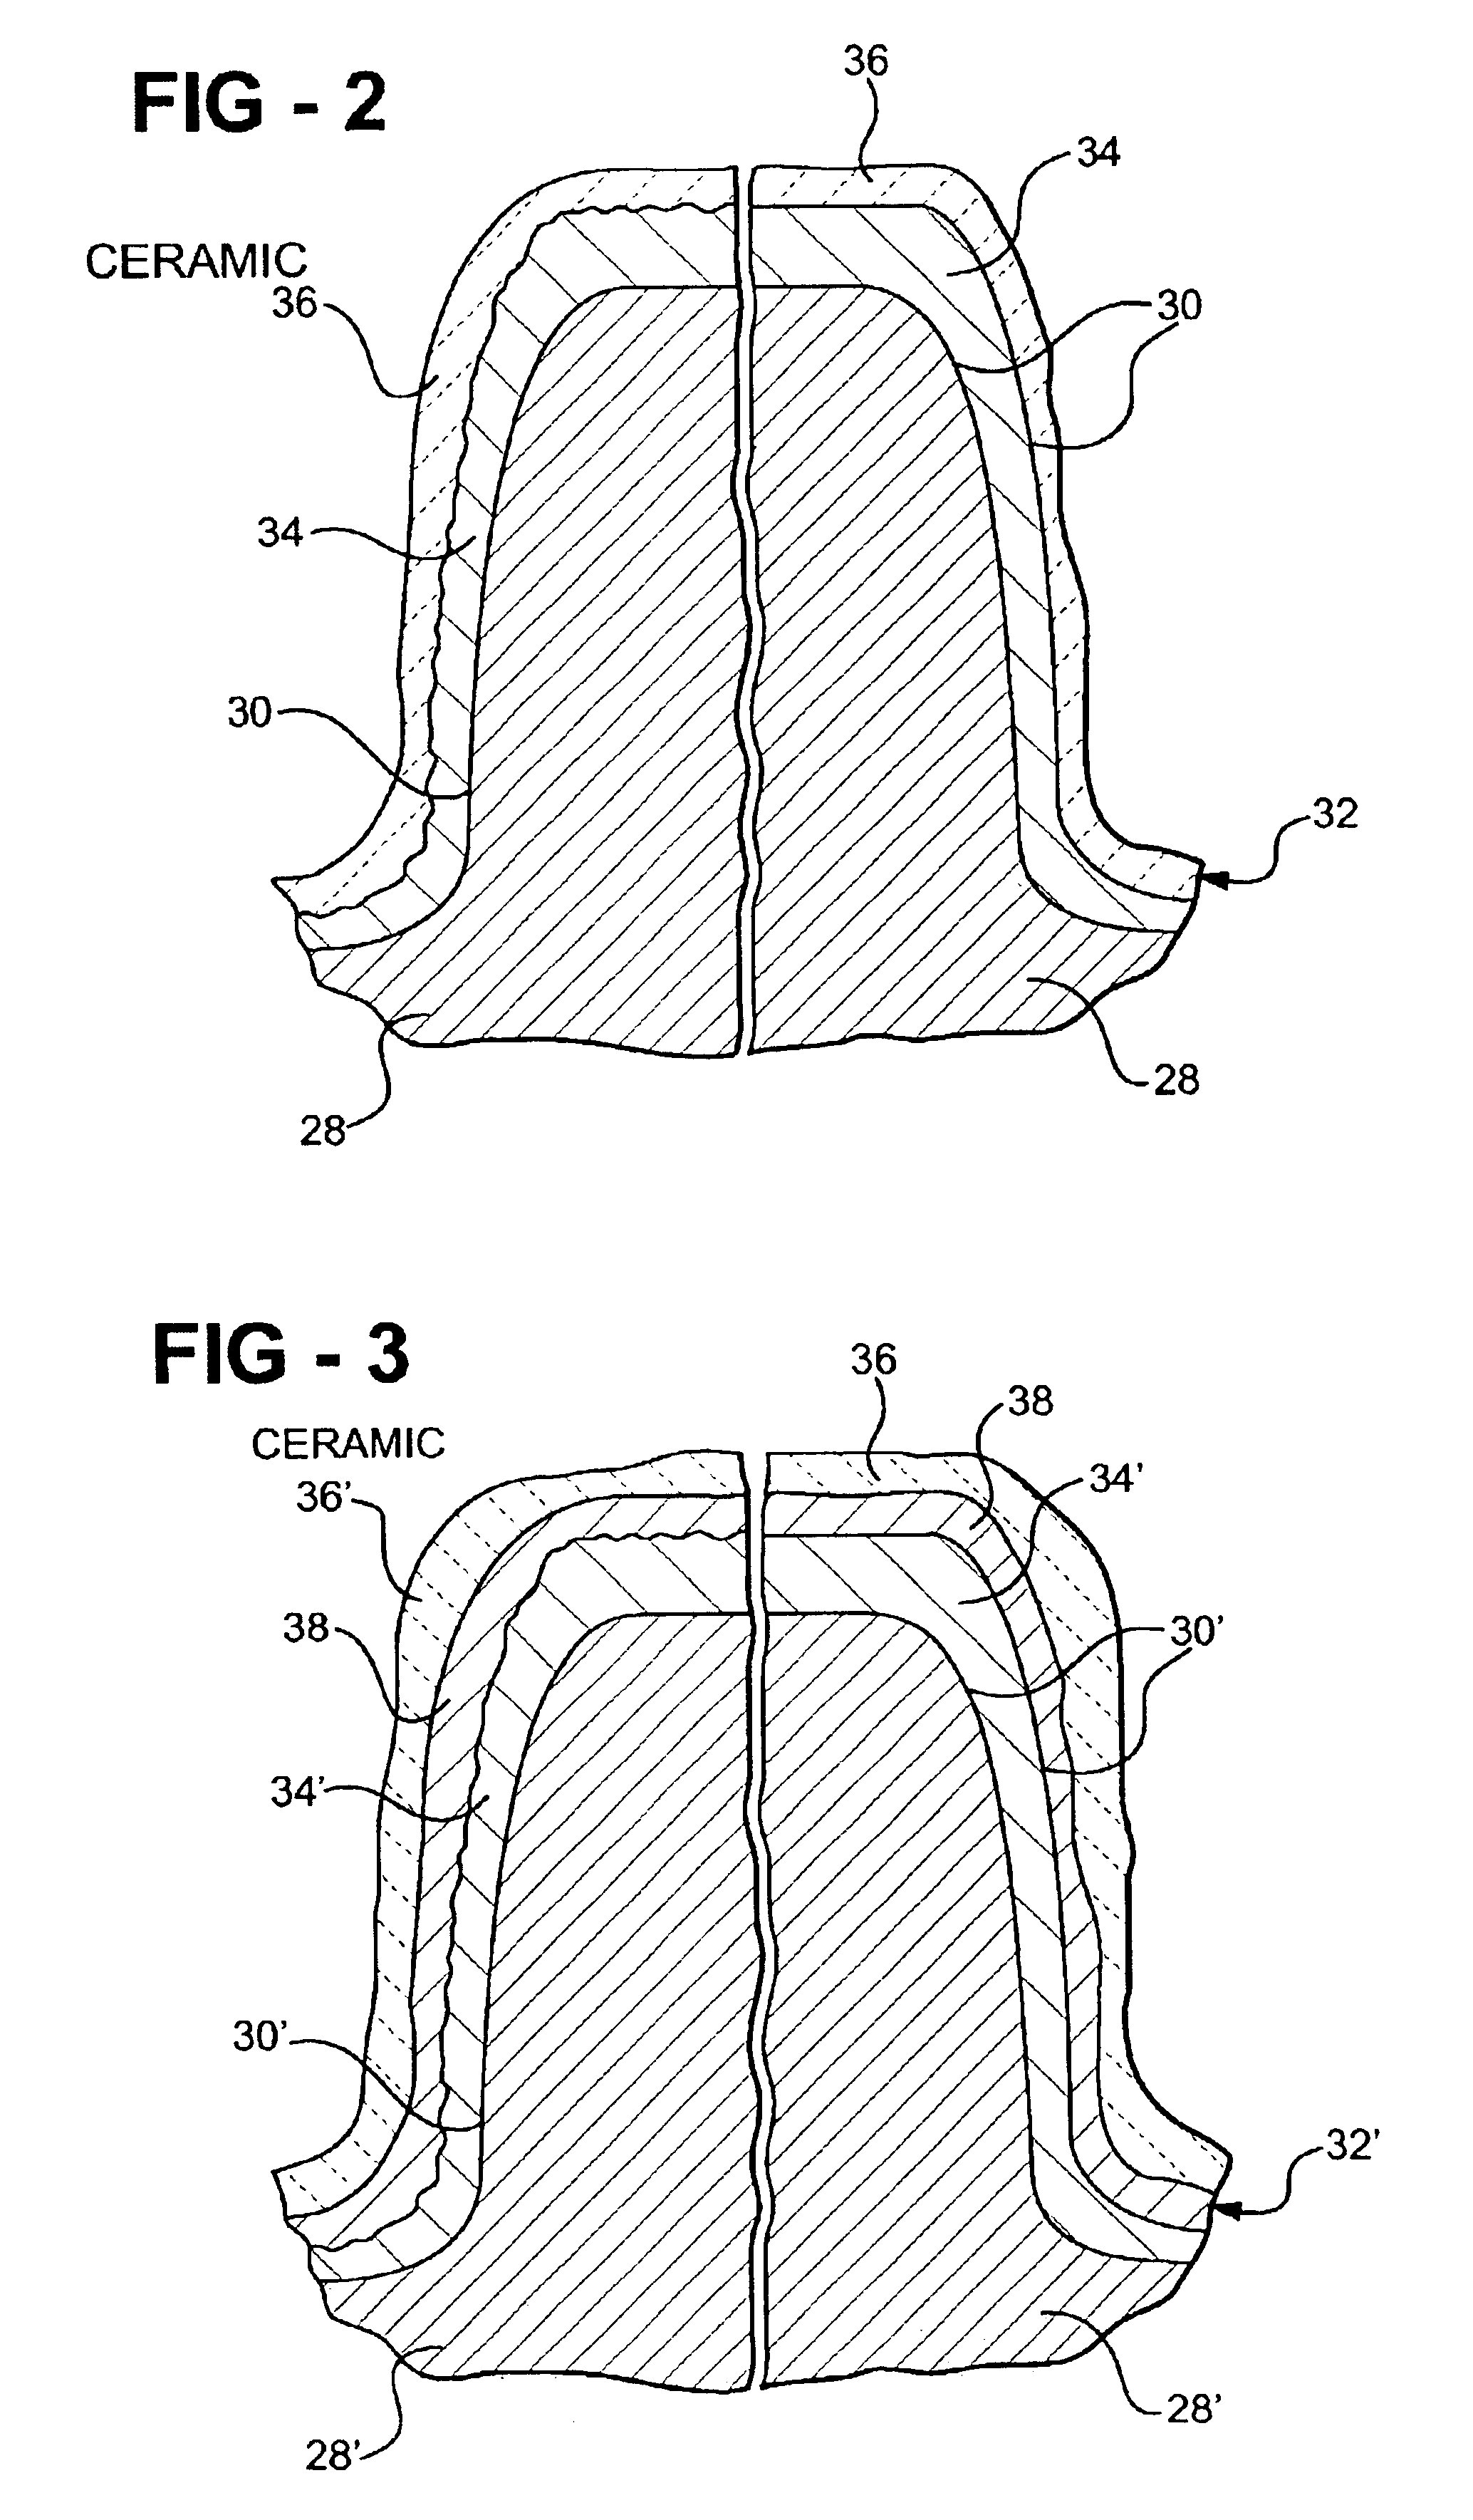 Planetary gearset with multi-layer coated sun gear